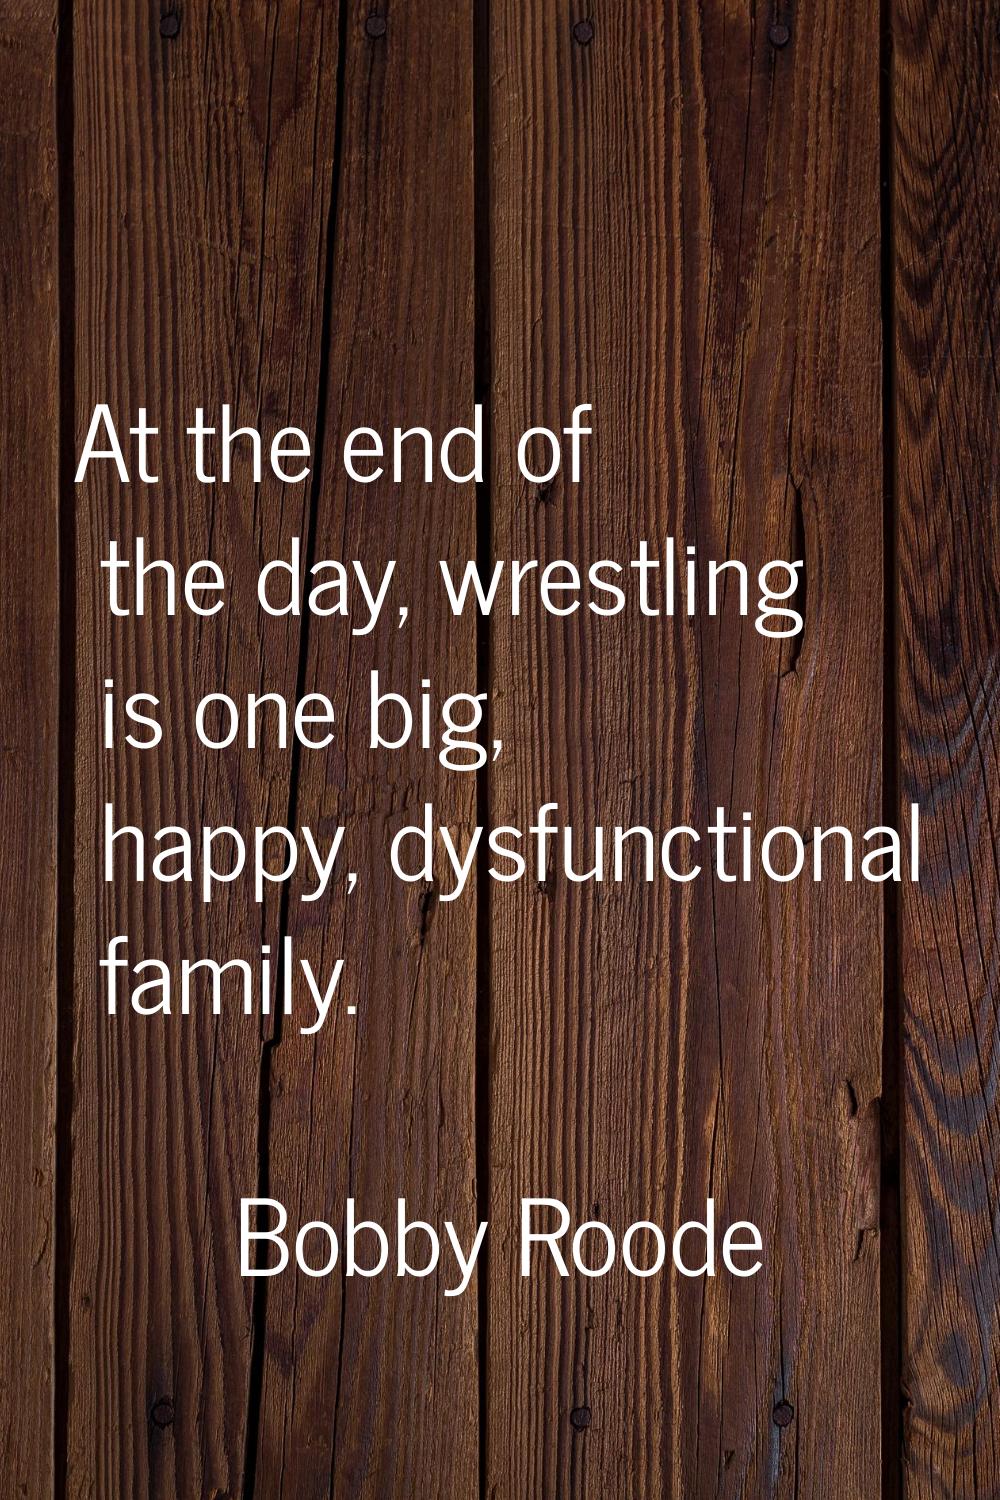 At the end of the day, wrestling is one big, happy, dysfunctional family.